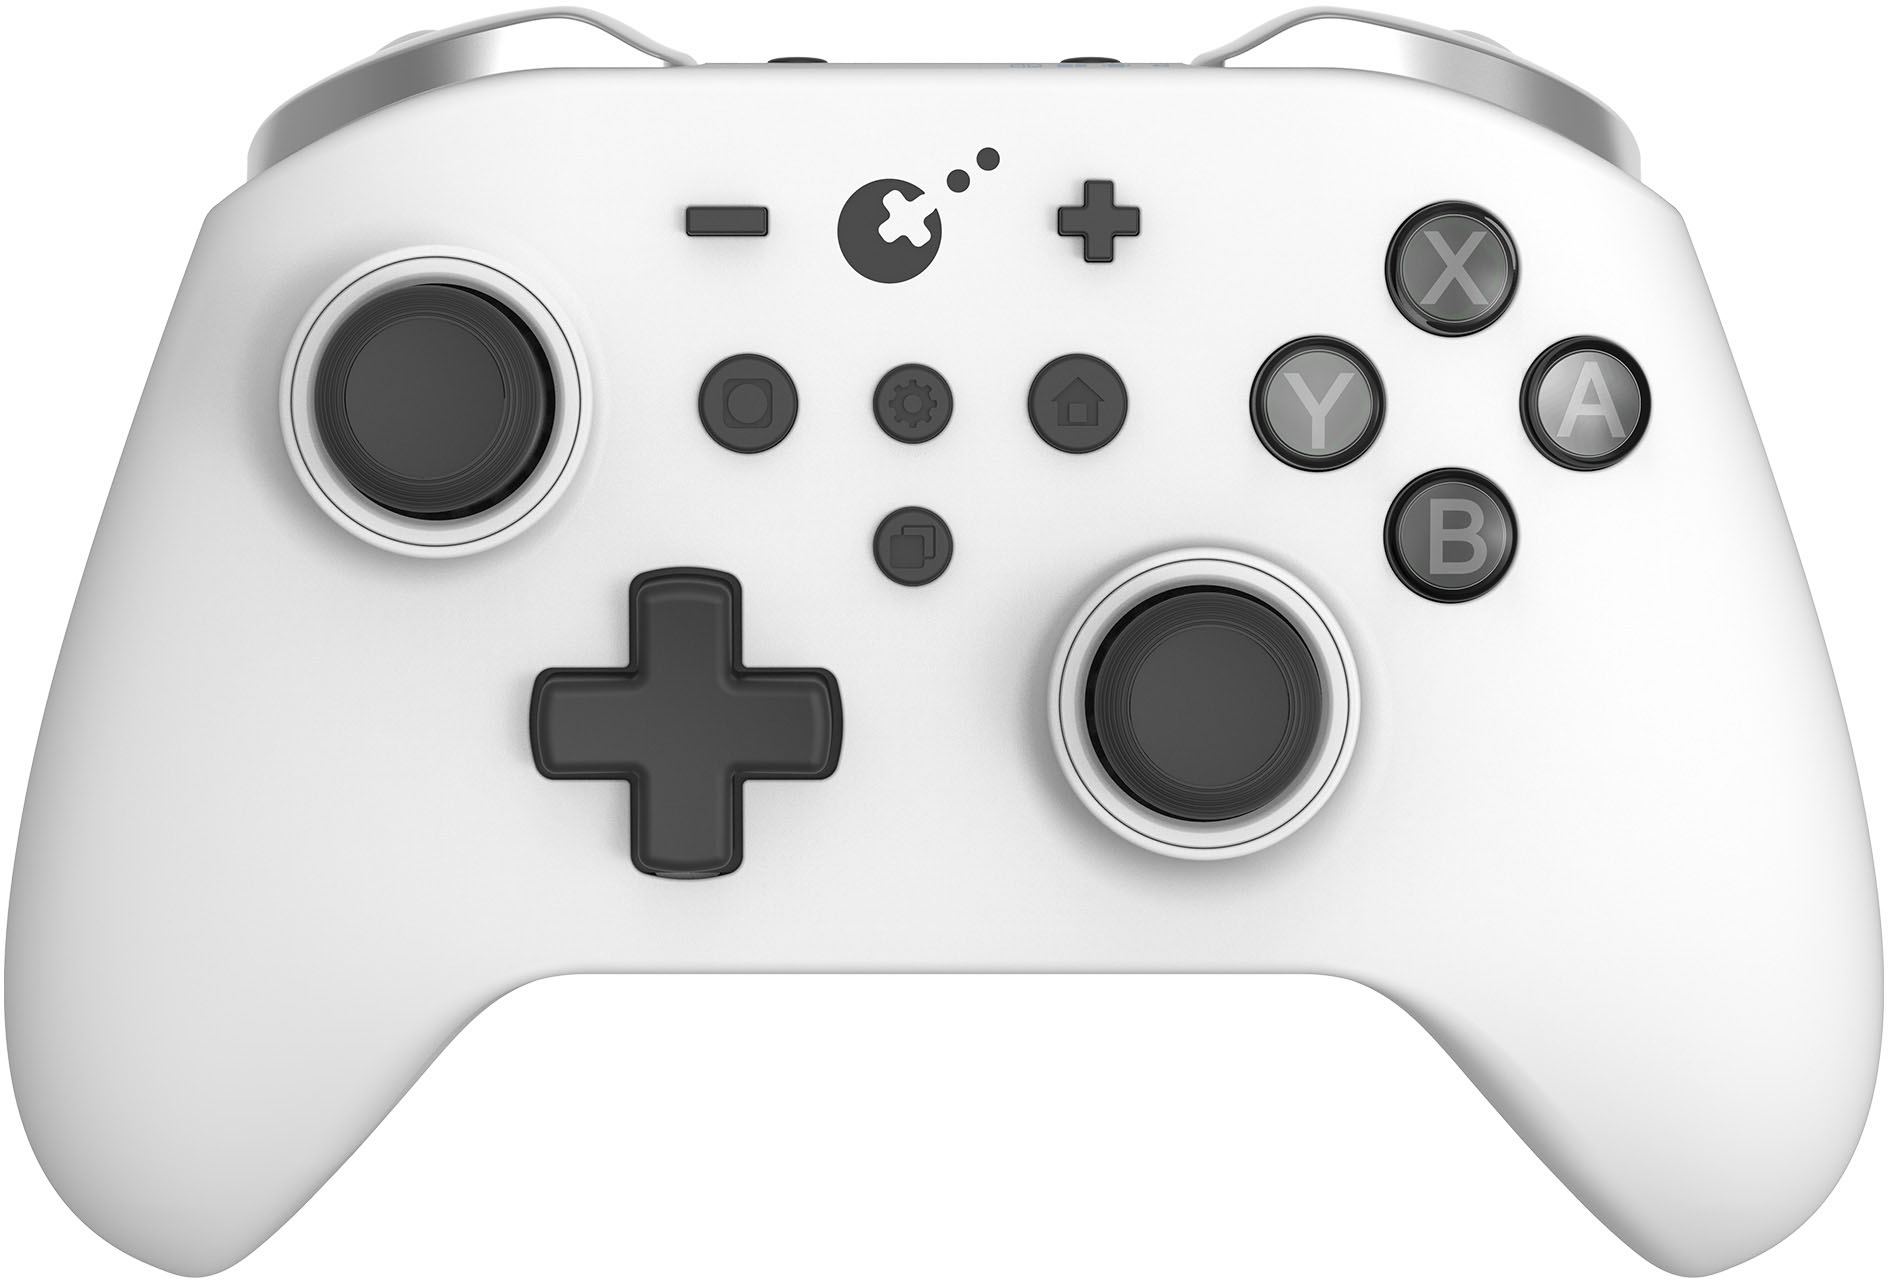 Best last-minute gaming gifts: Gift cards, Controllers, and more